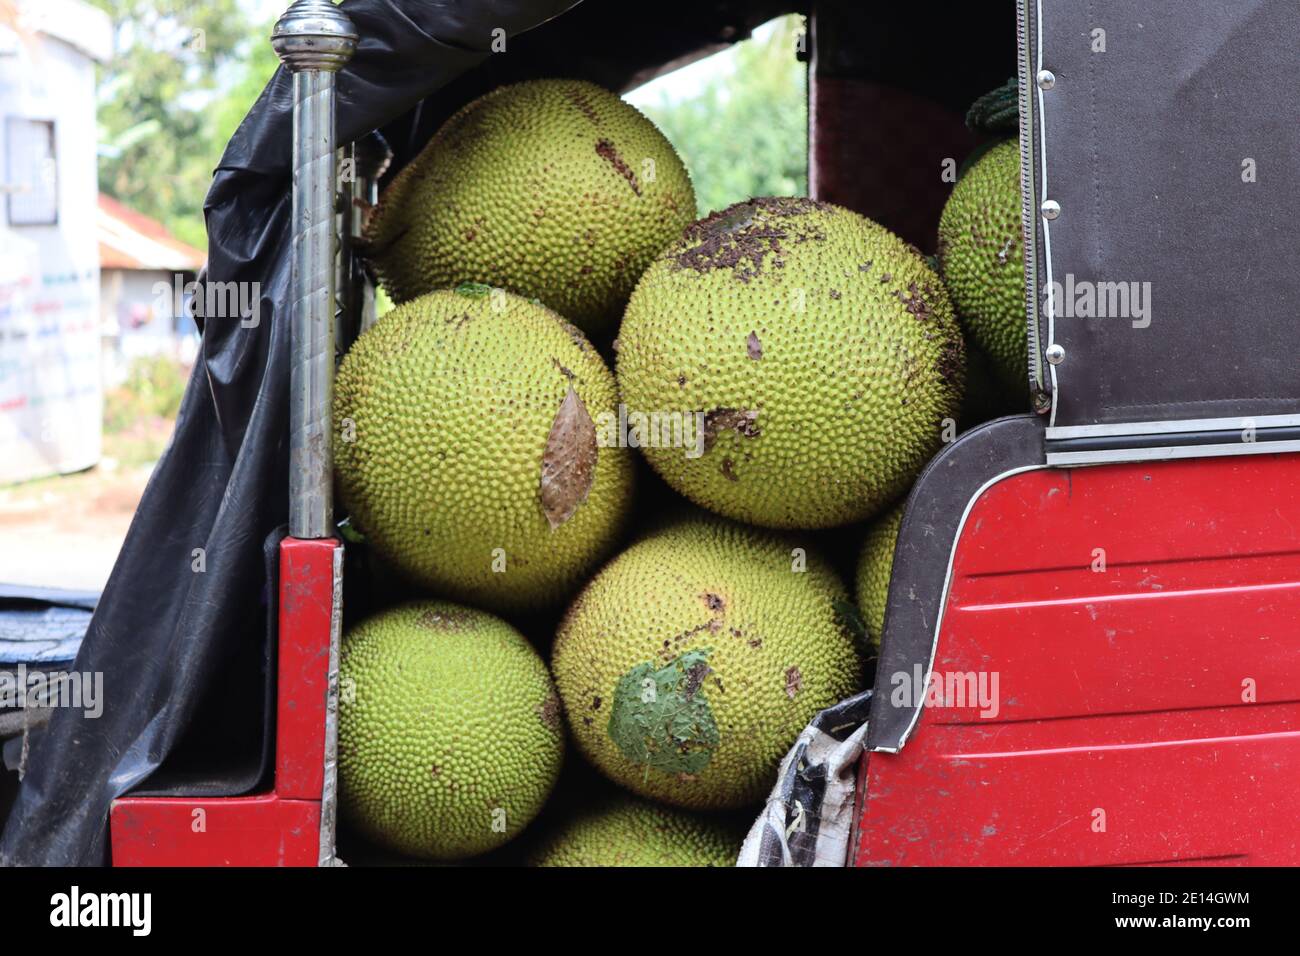 Delivering jack fruits to the market. Popular Jack fruit is strong food and we can use it as a main food for our life because it is similar to rice. Stock Photo